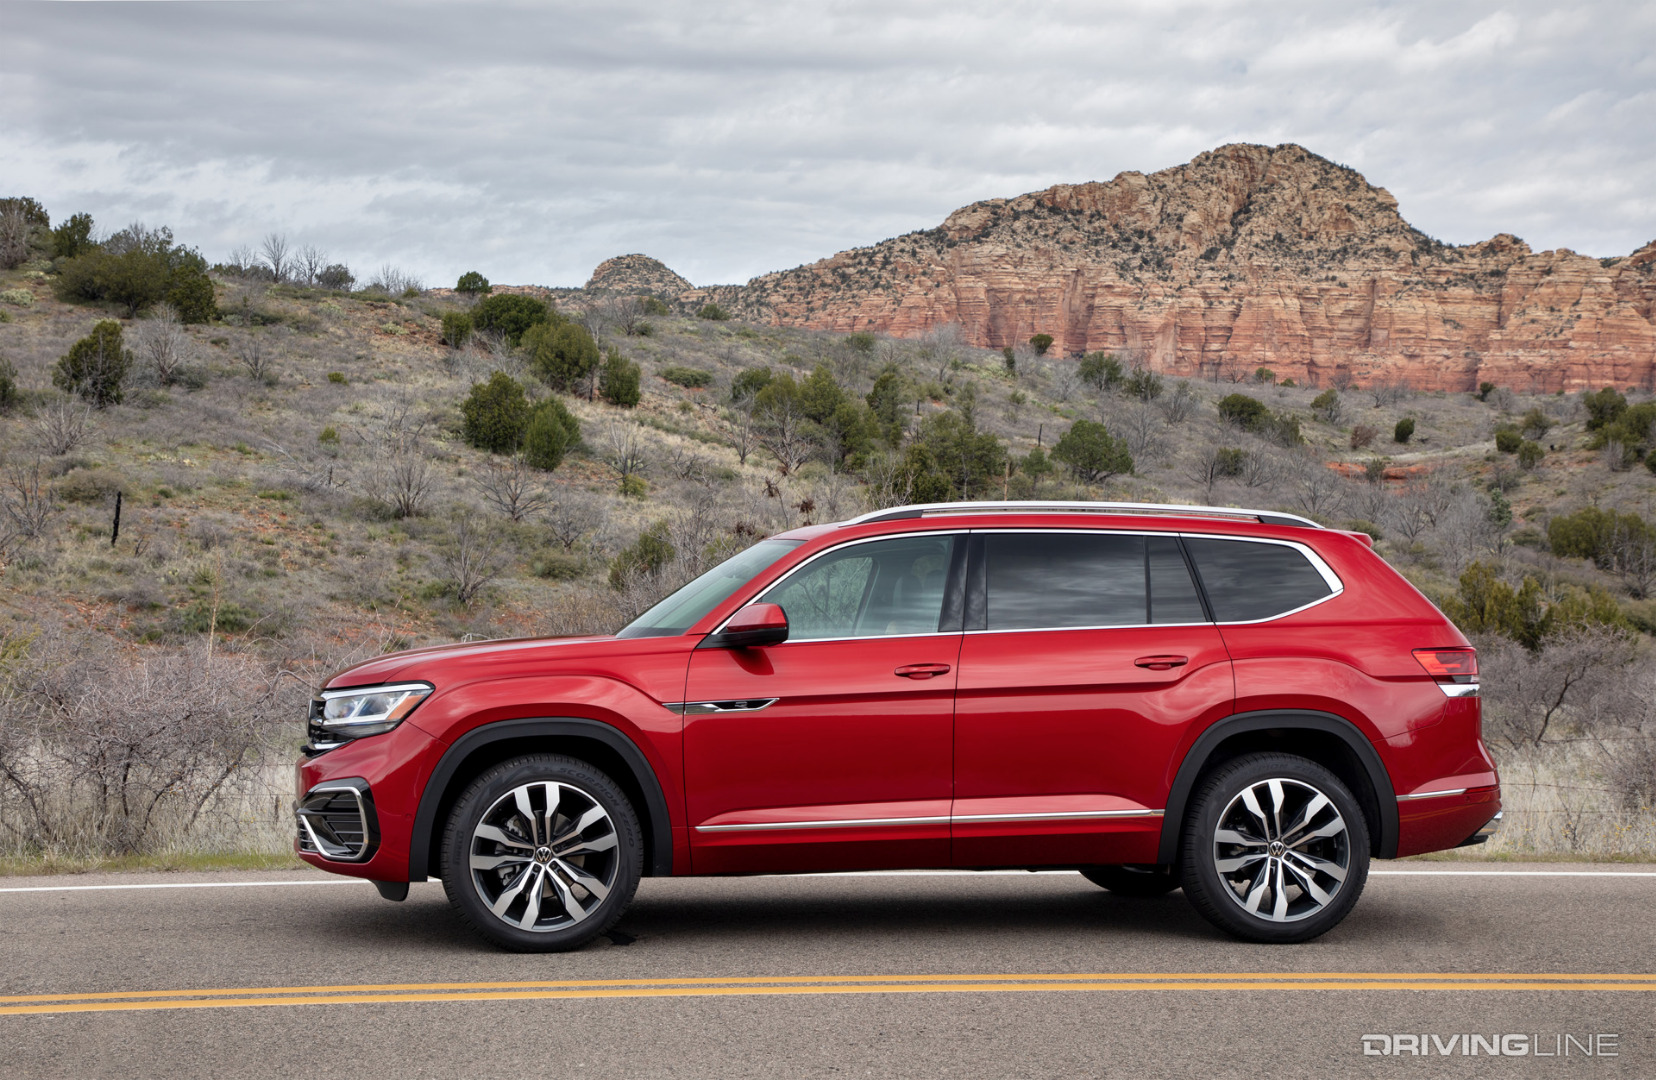 The Ideal Modestly-Priced, Mid-Sized SUV With Third-Row Seating: Part 1